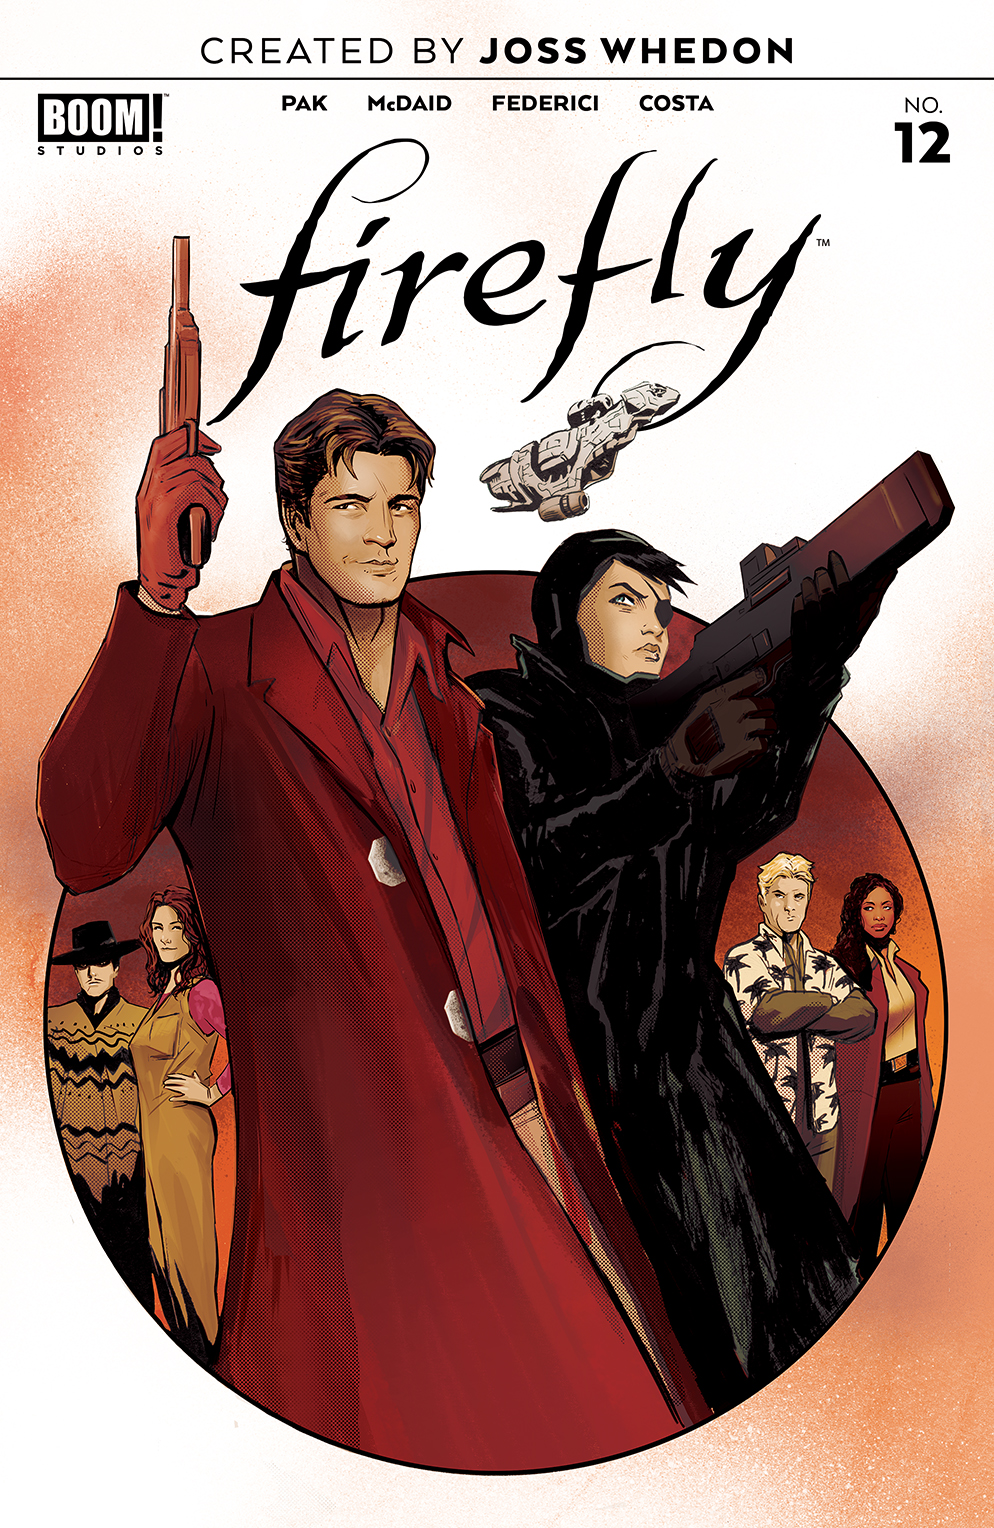 Firefly #12 (BOOM! Studios) - Preview